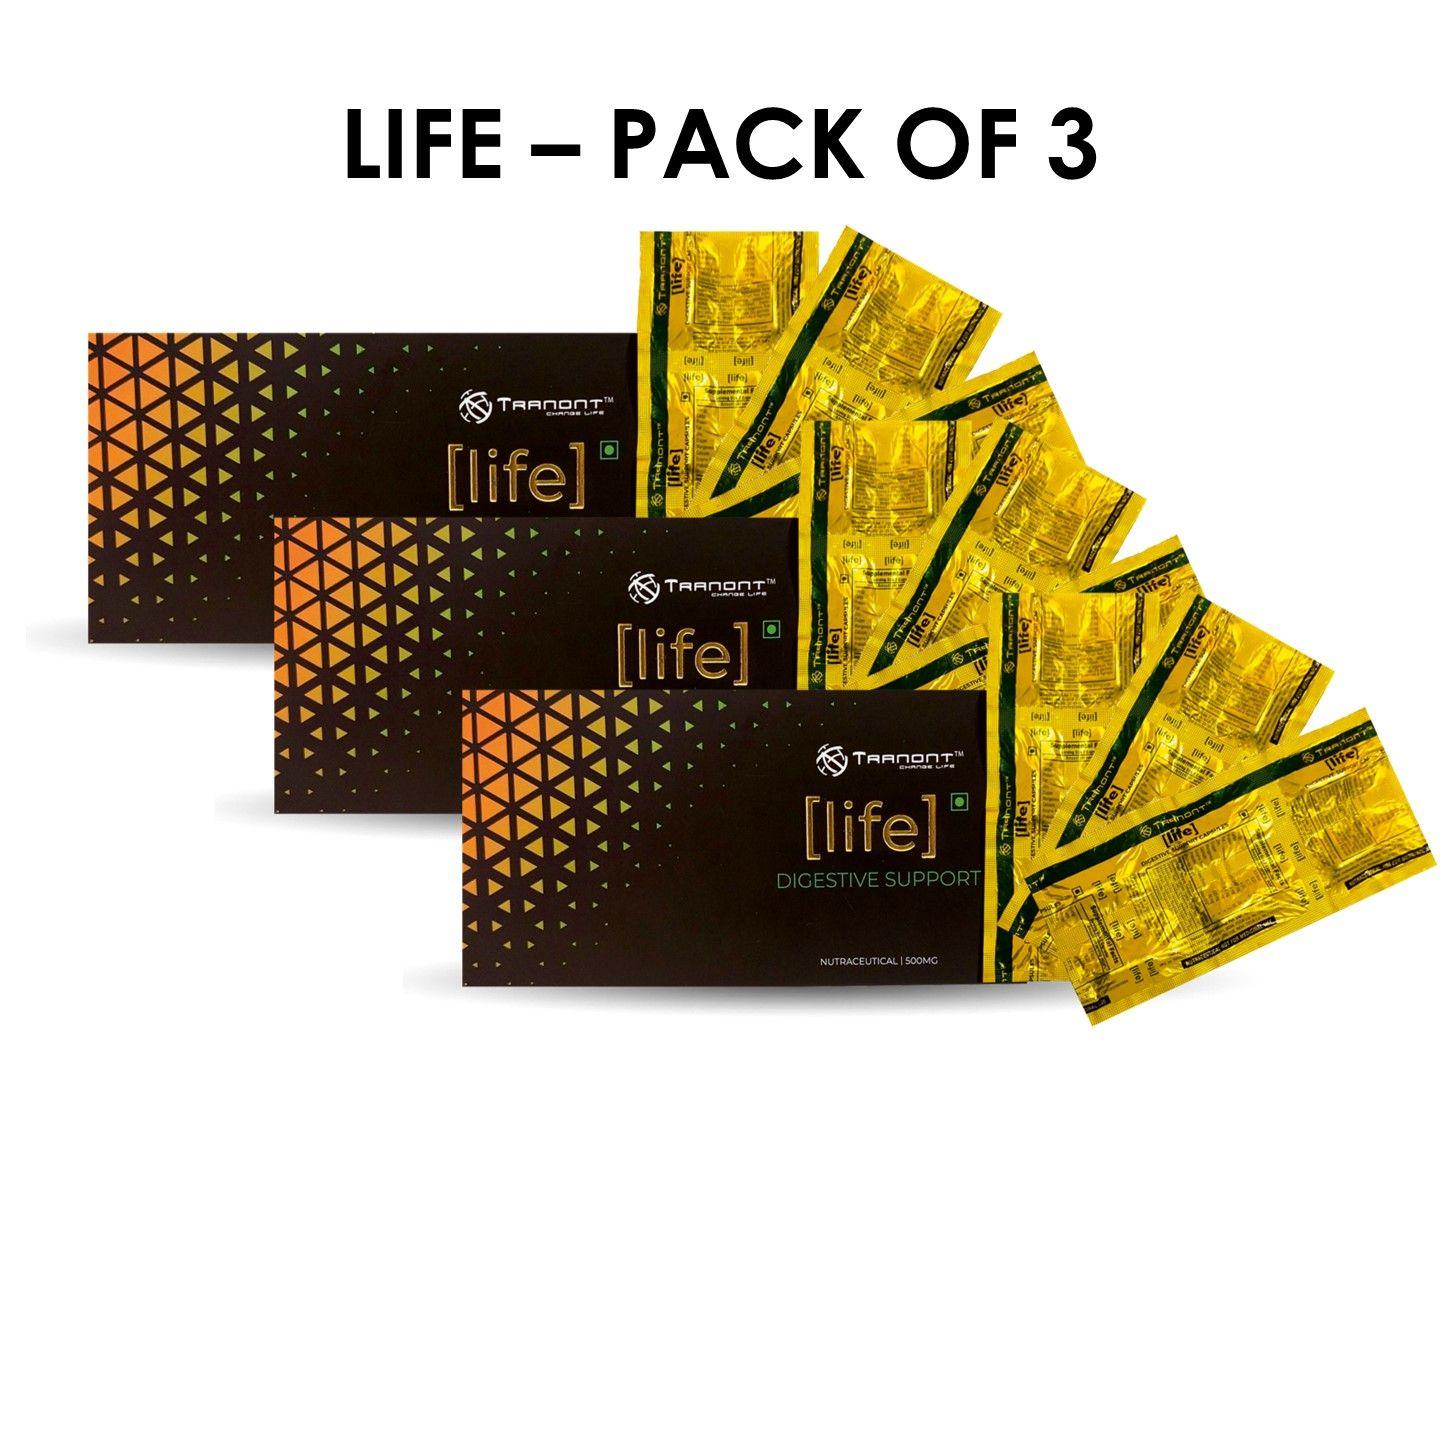 Life - Pack of 3